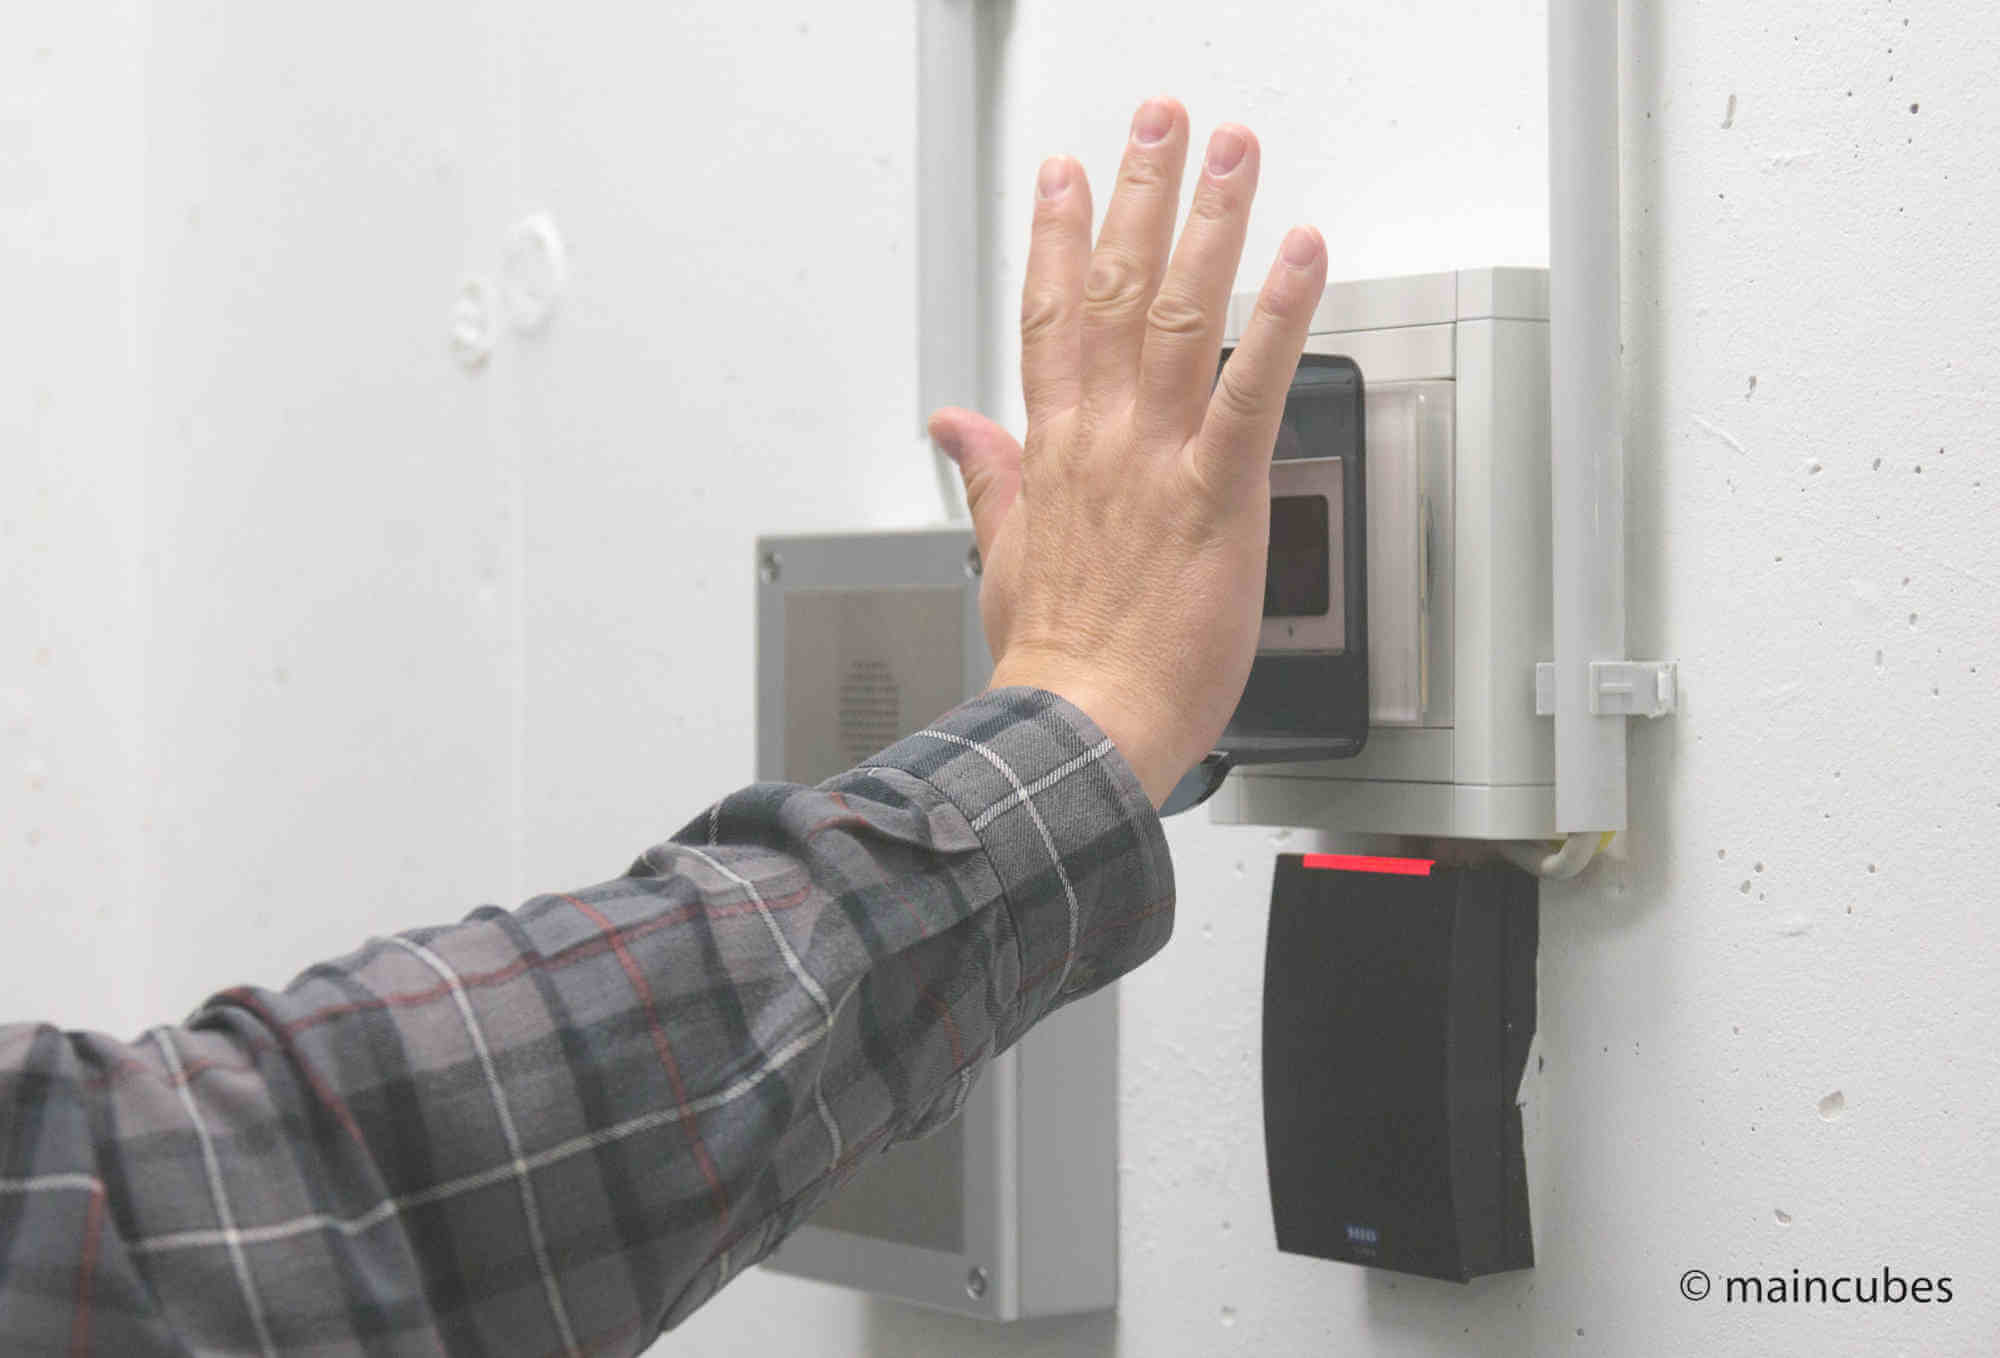 Hand resting on a vein scanner in a security gate